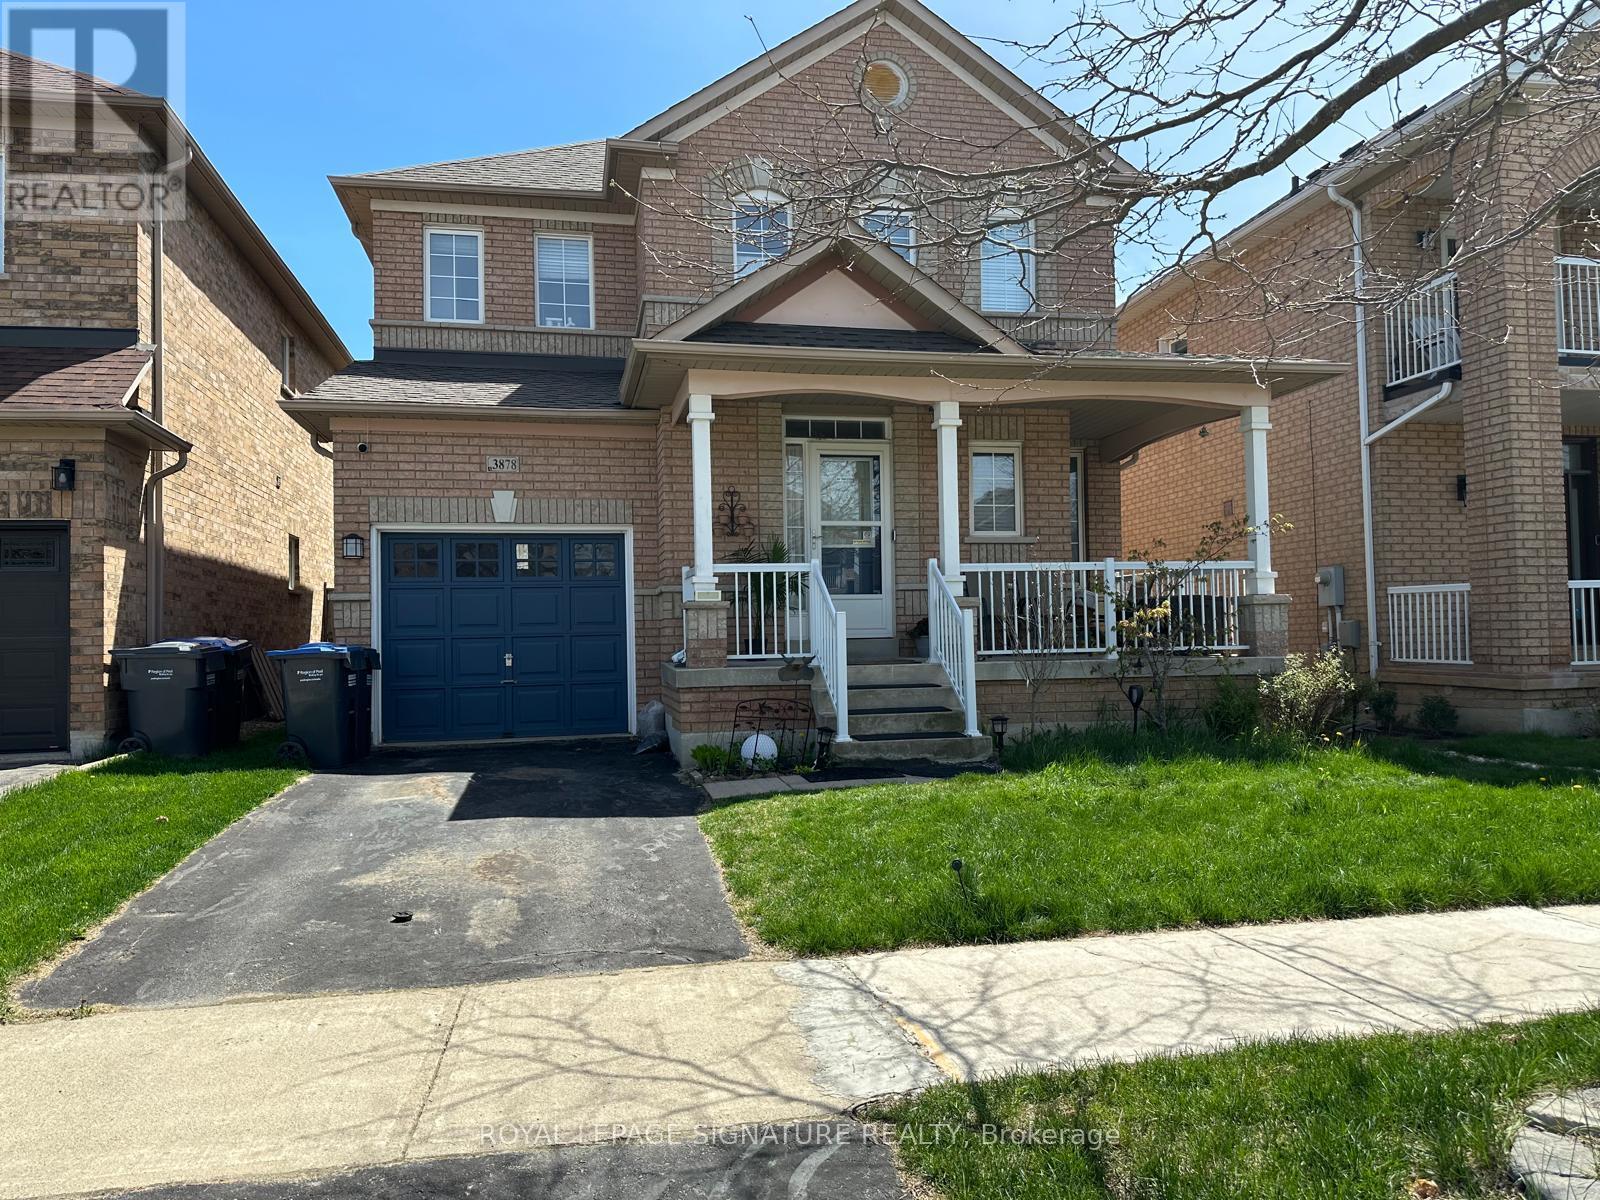 3878 TACC DR, mississauga, Ontario